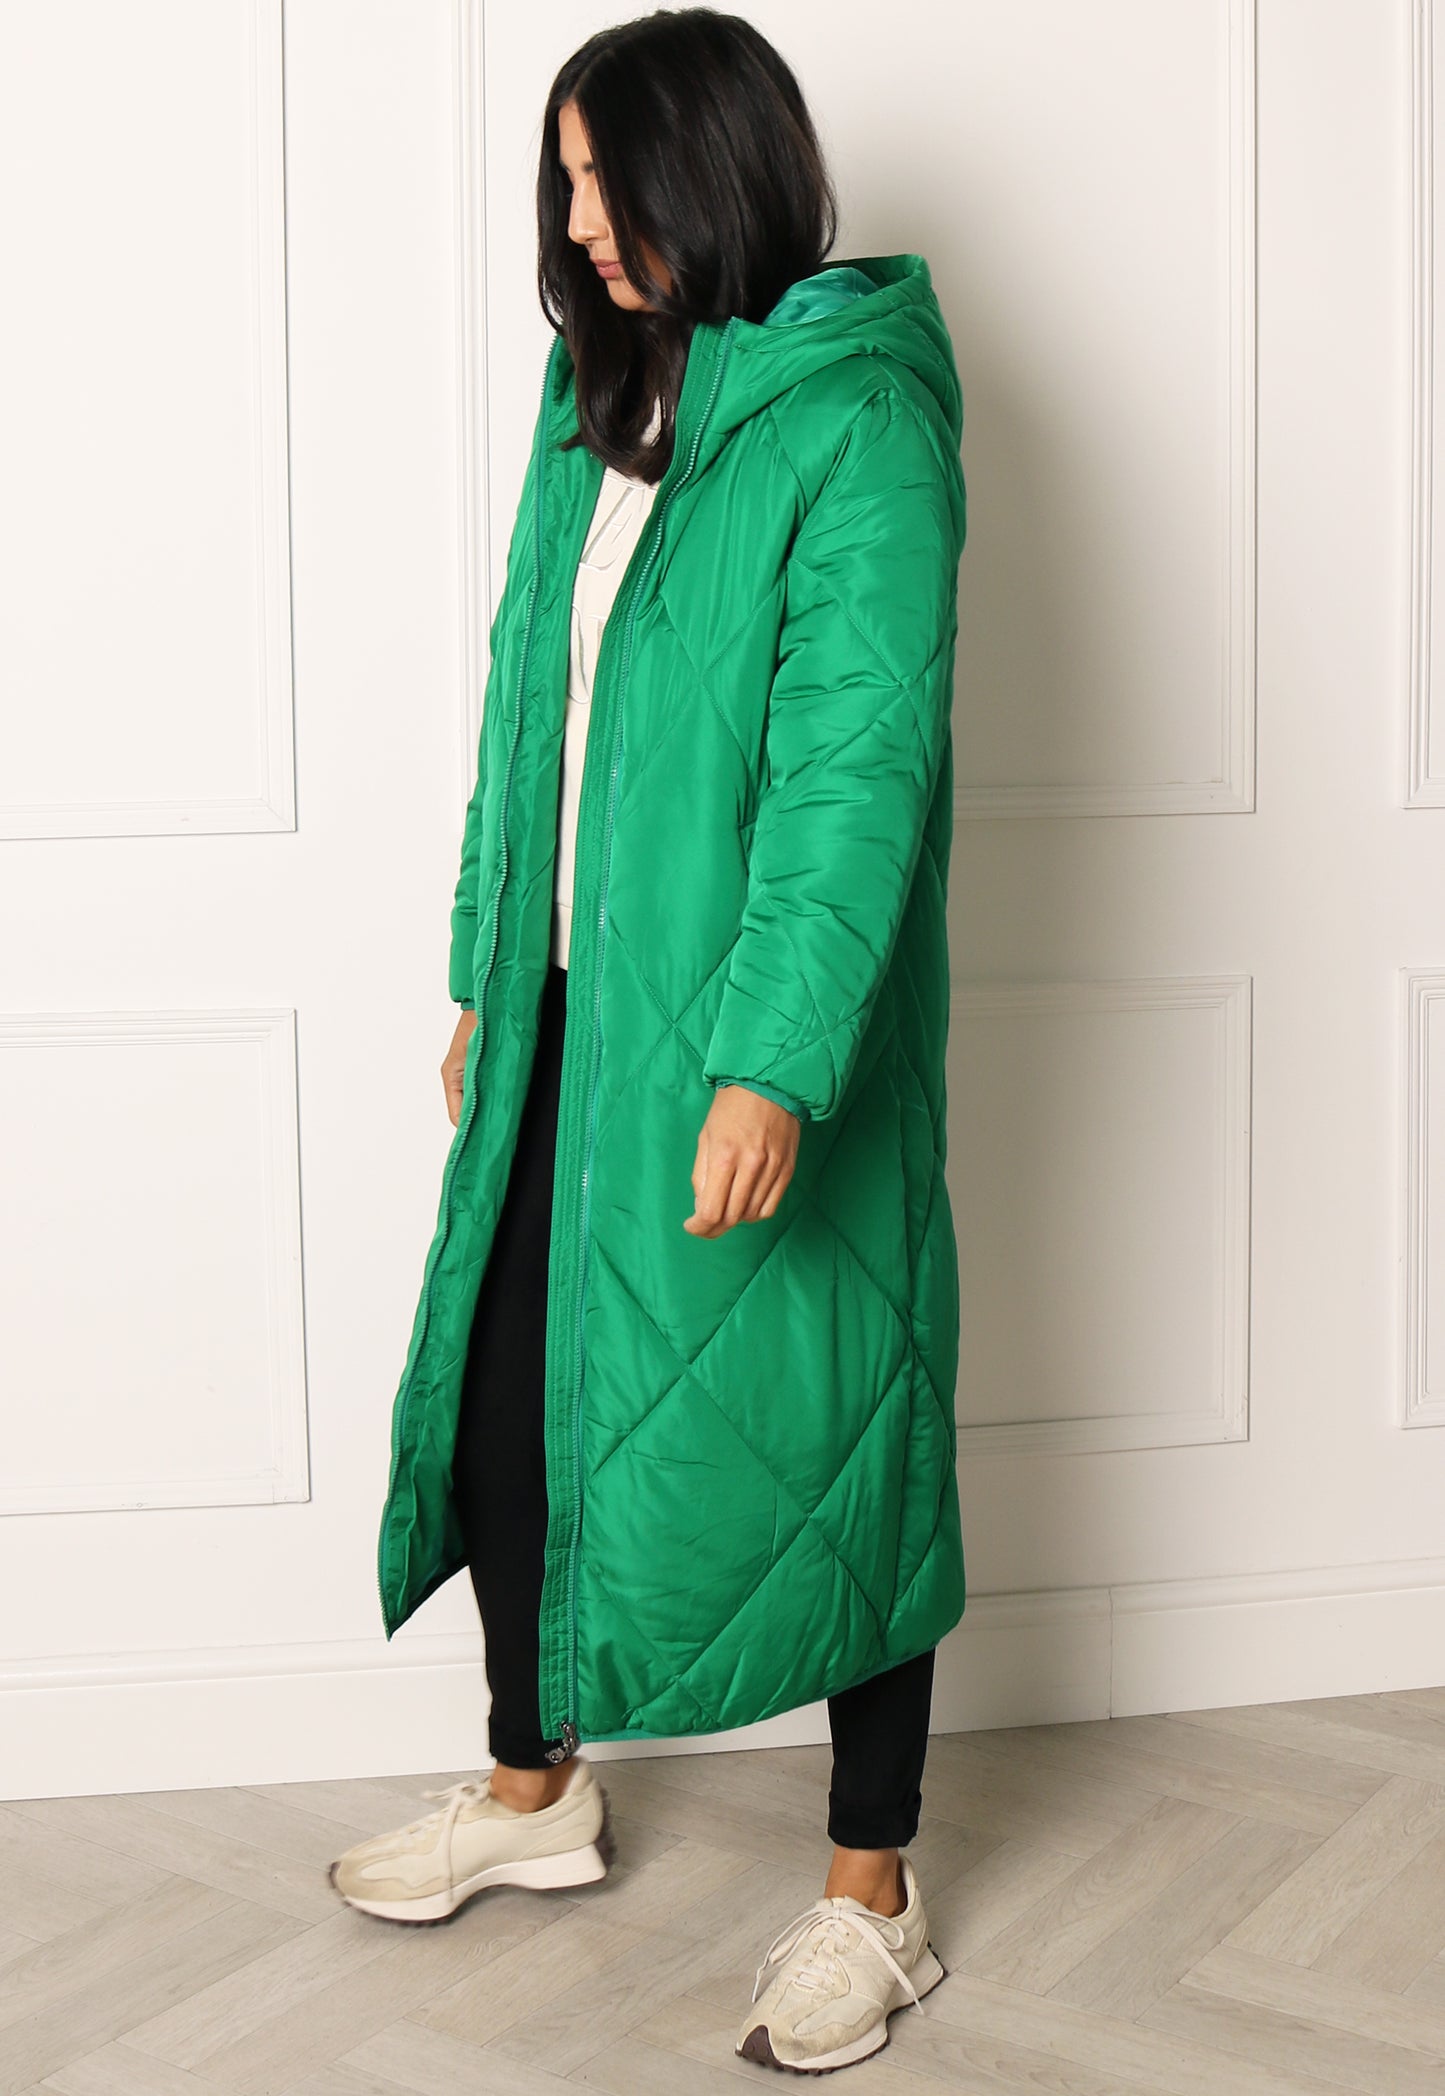 ONLY Tamara Maxi Diamond Quilted Longline Puffer Coat with Funnel Neck in Green - concretebartops